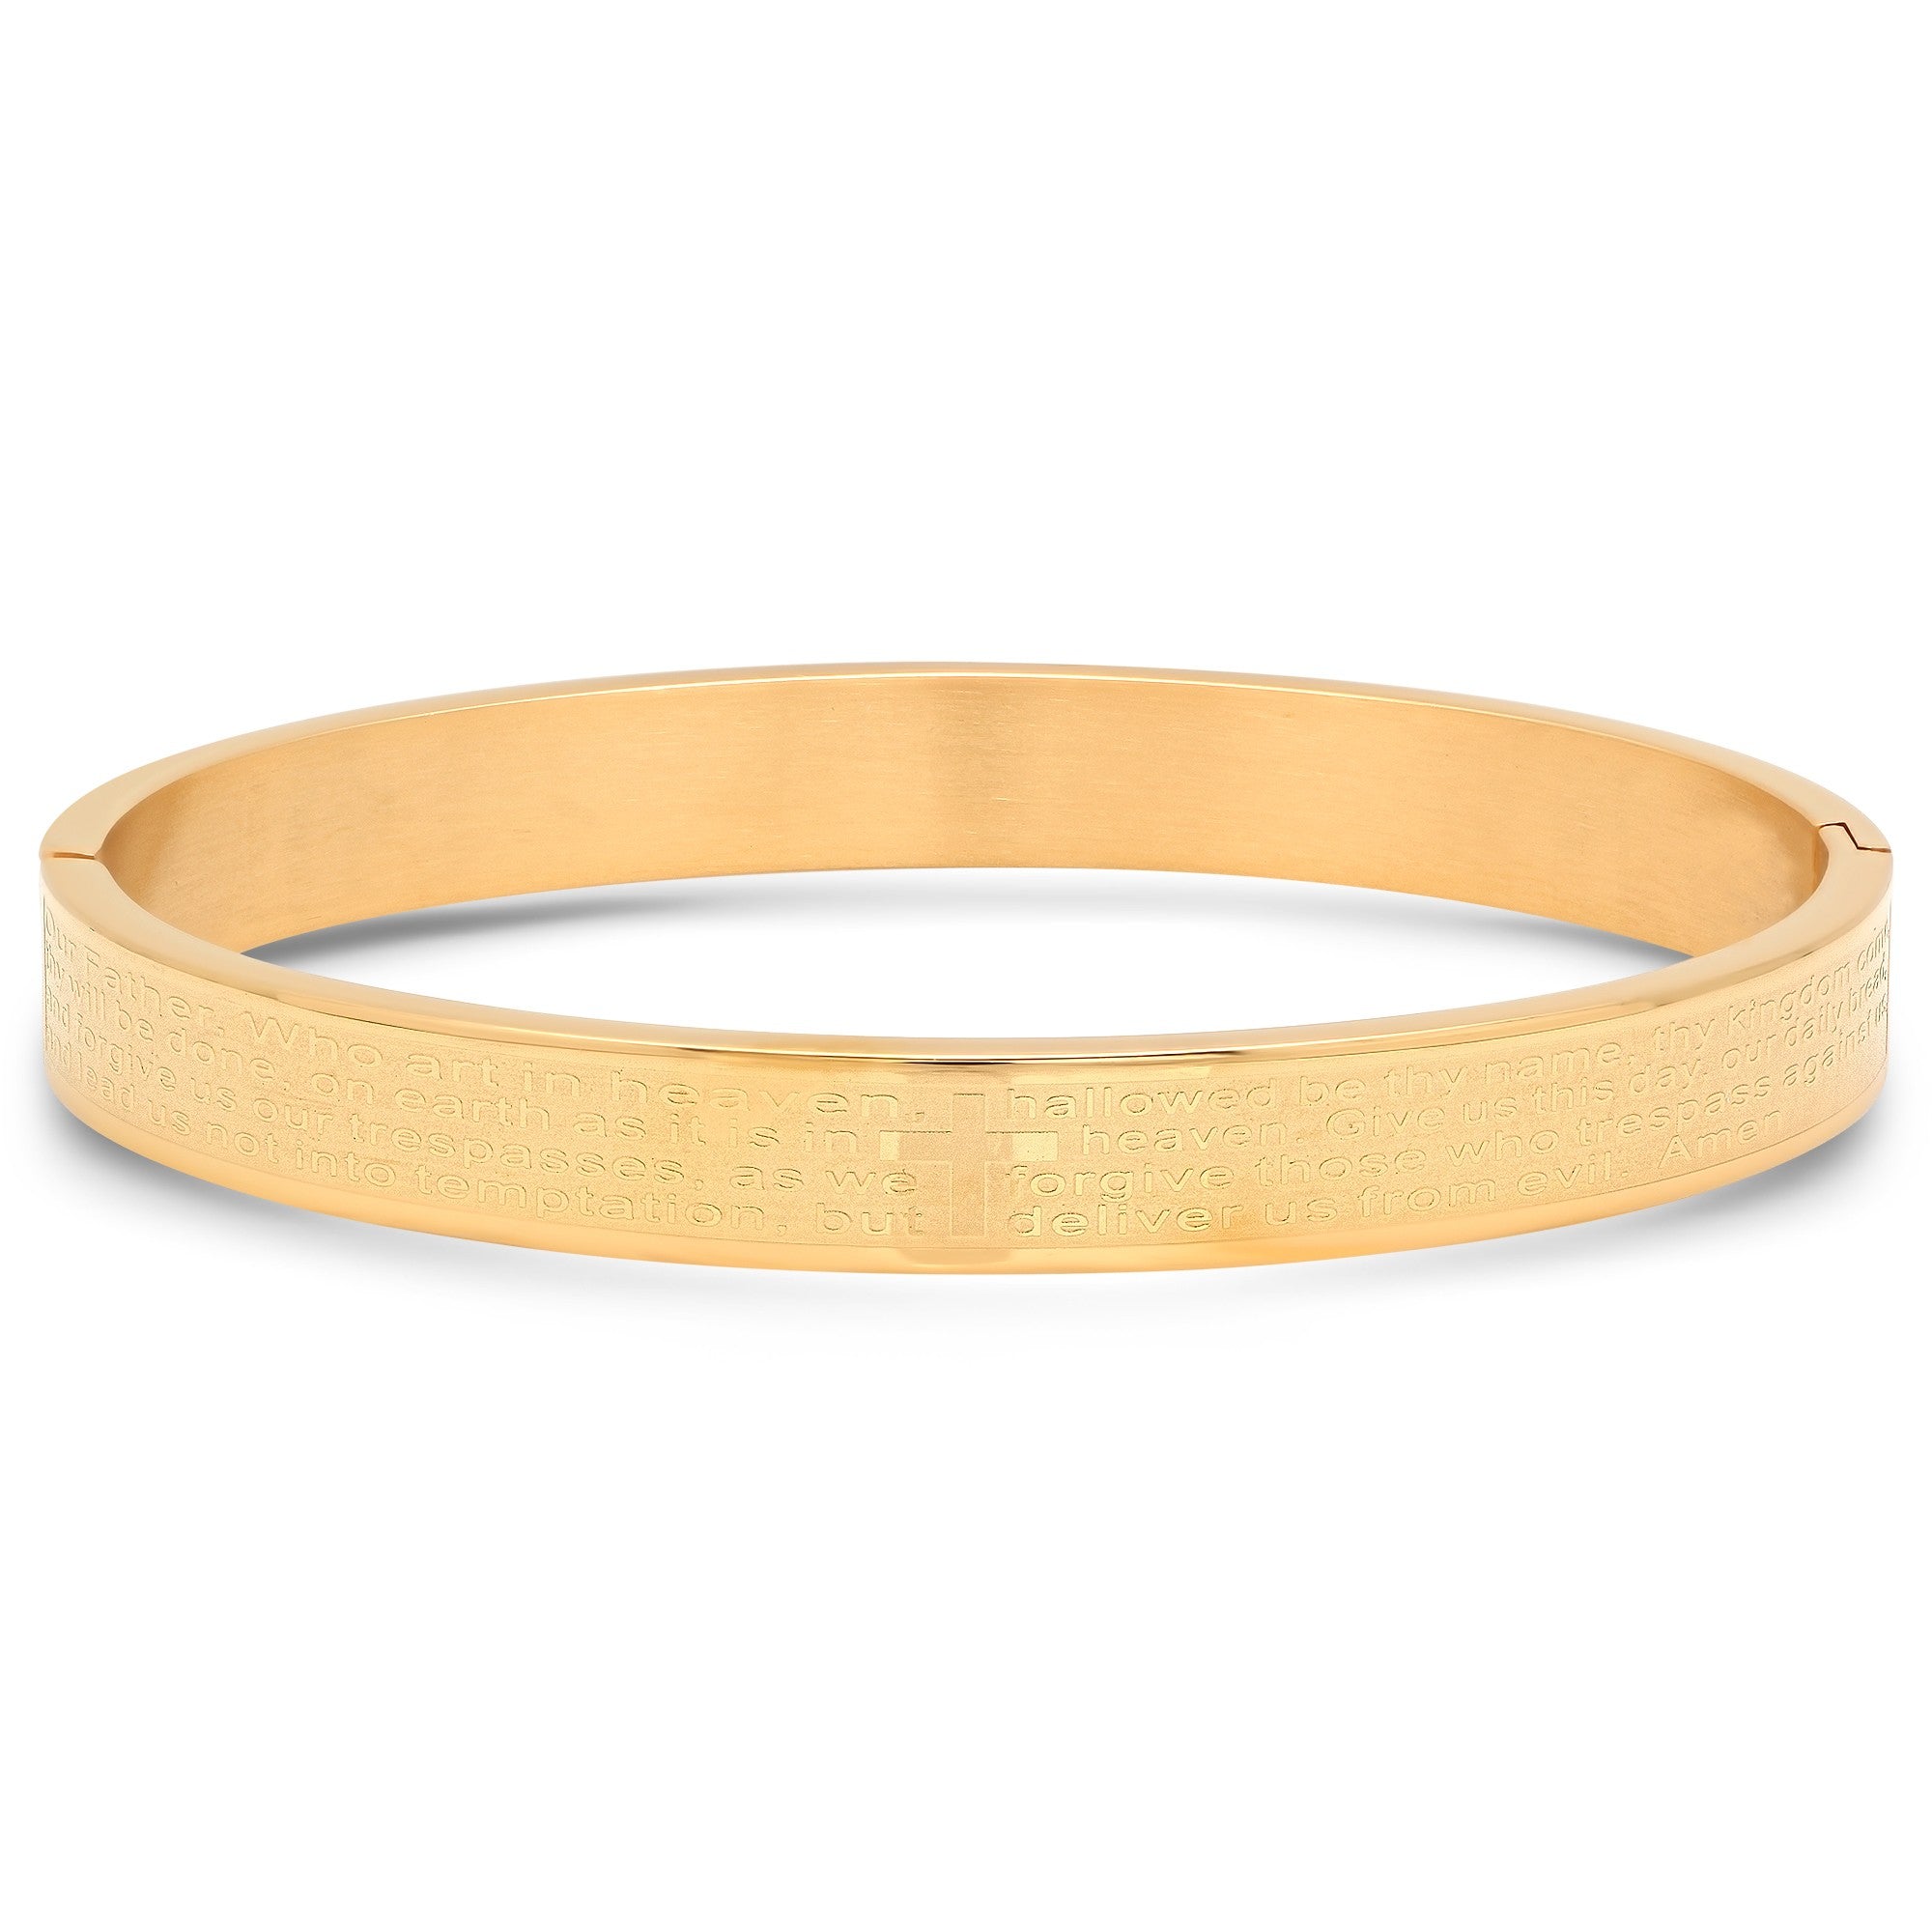 title:SteelTime Women's Lord's Prayer Bracelet In English;color:Gold